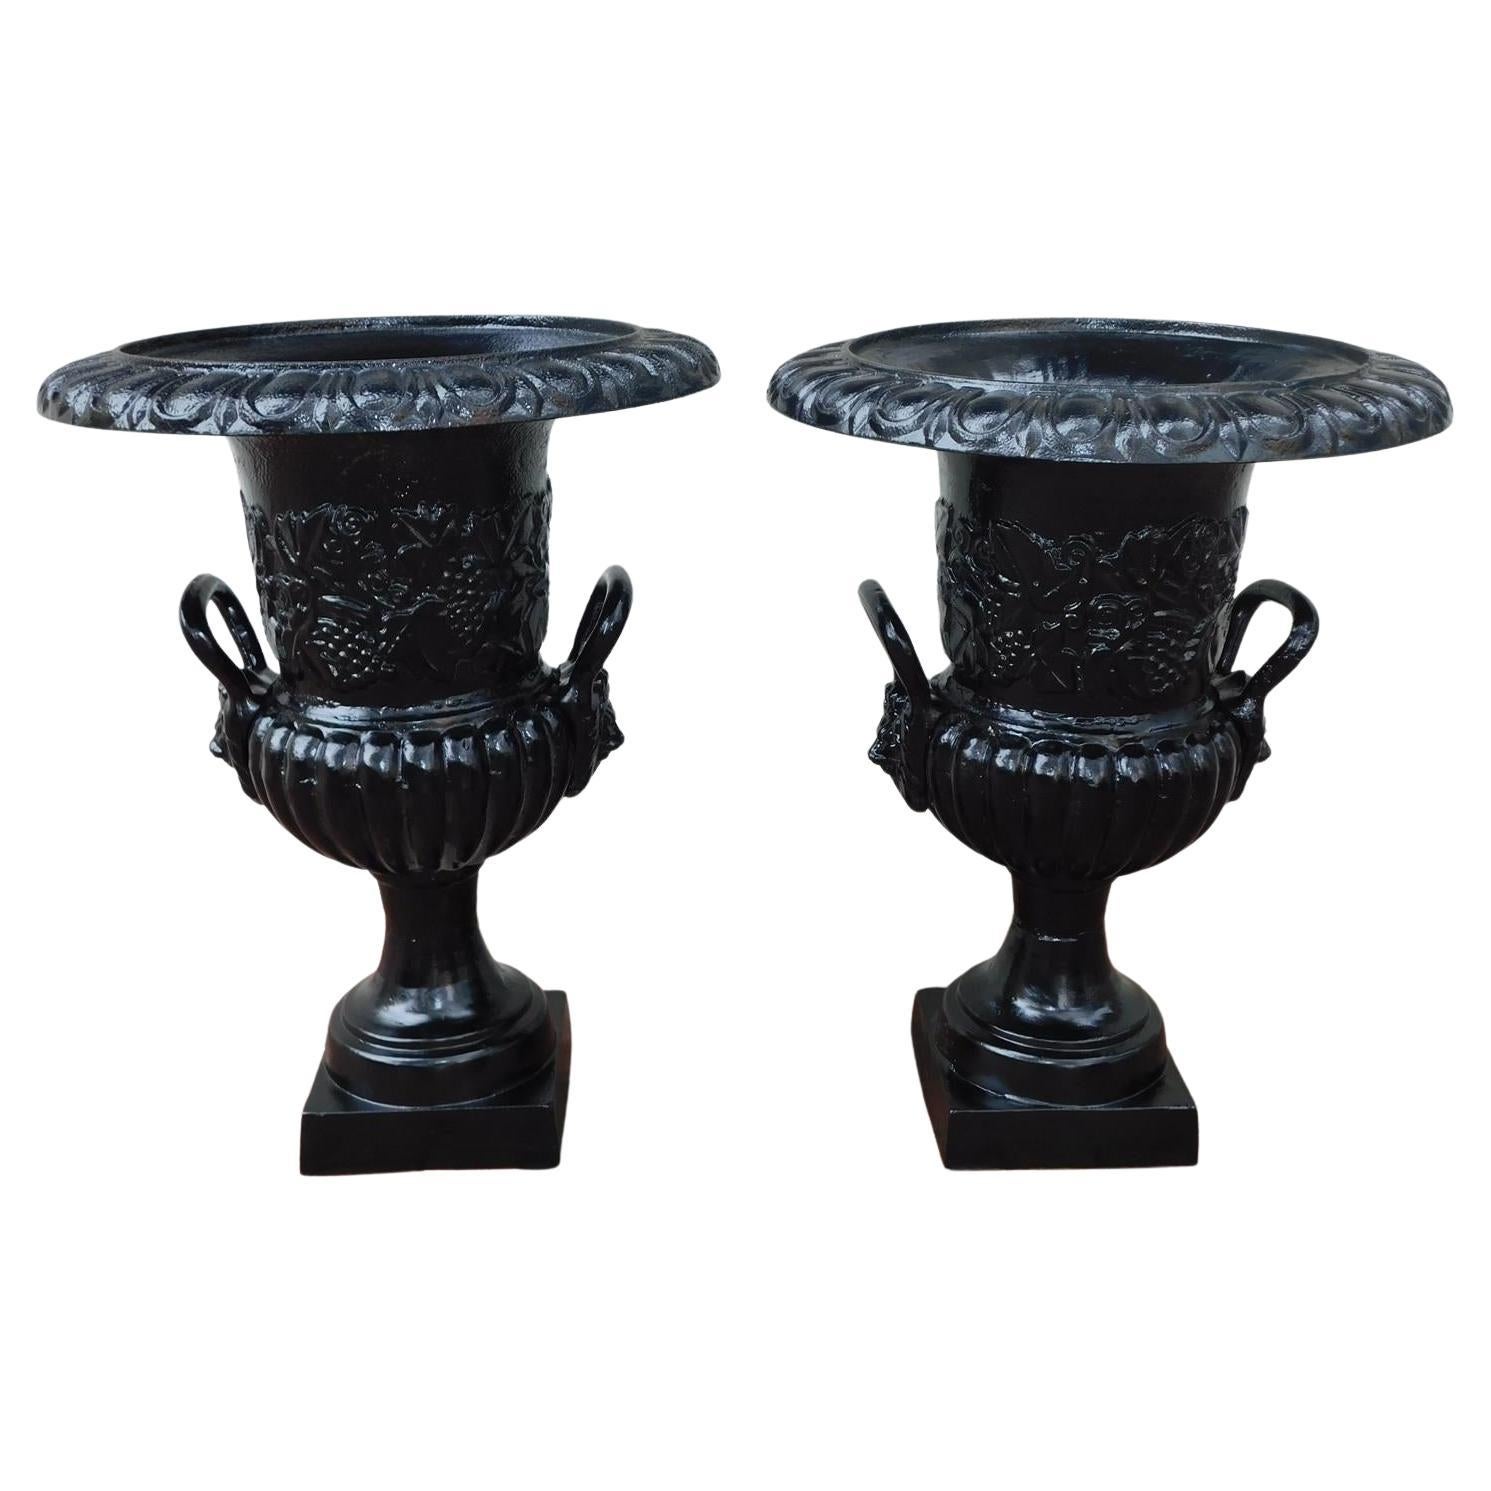 Pair of English Cast Iron and Powered Coated Campana-Form Garden Urns, C. 1850 For Sale